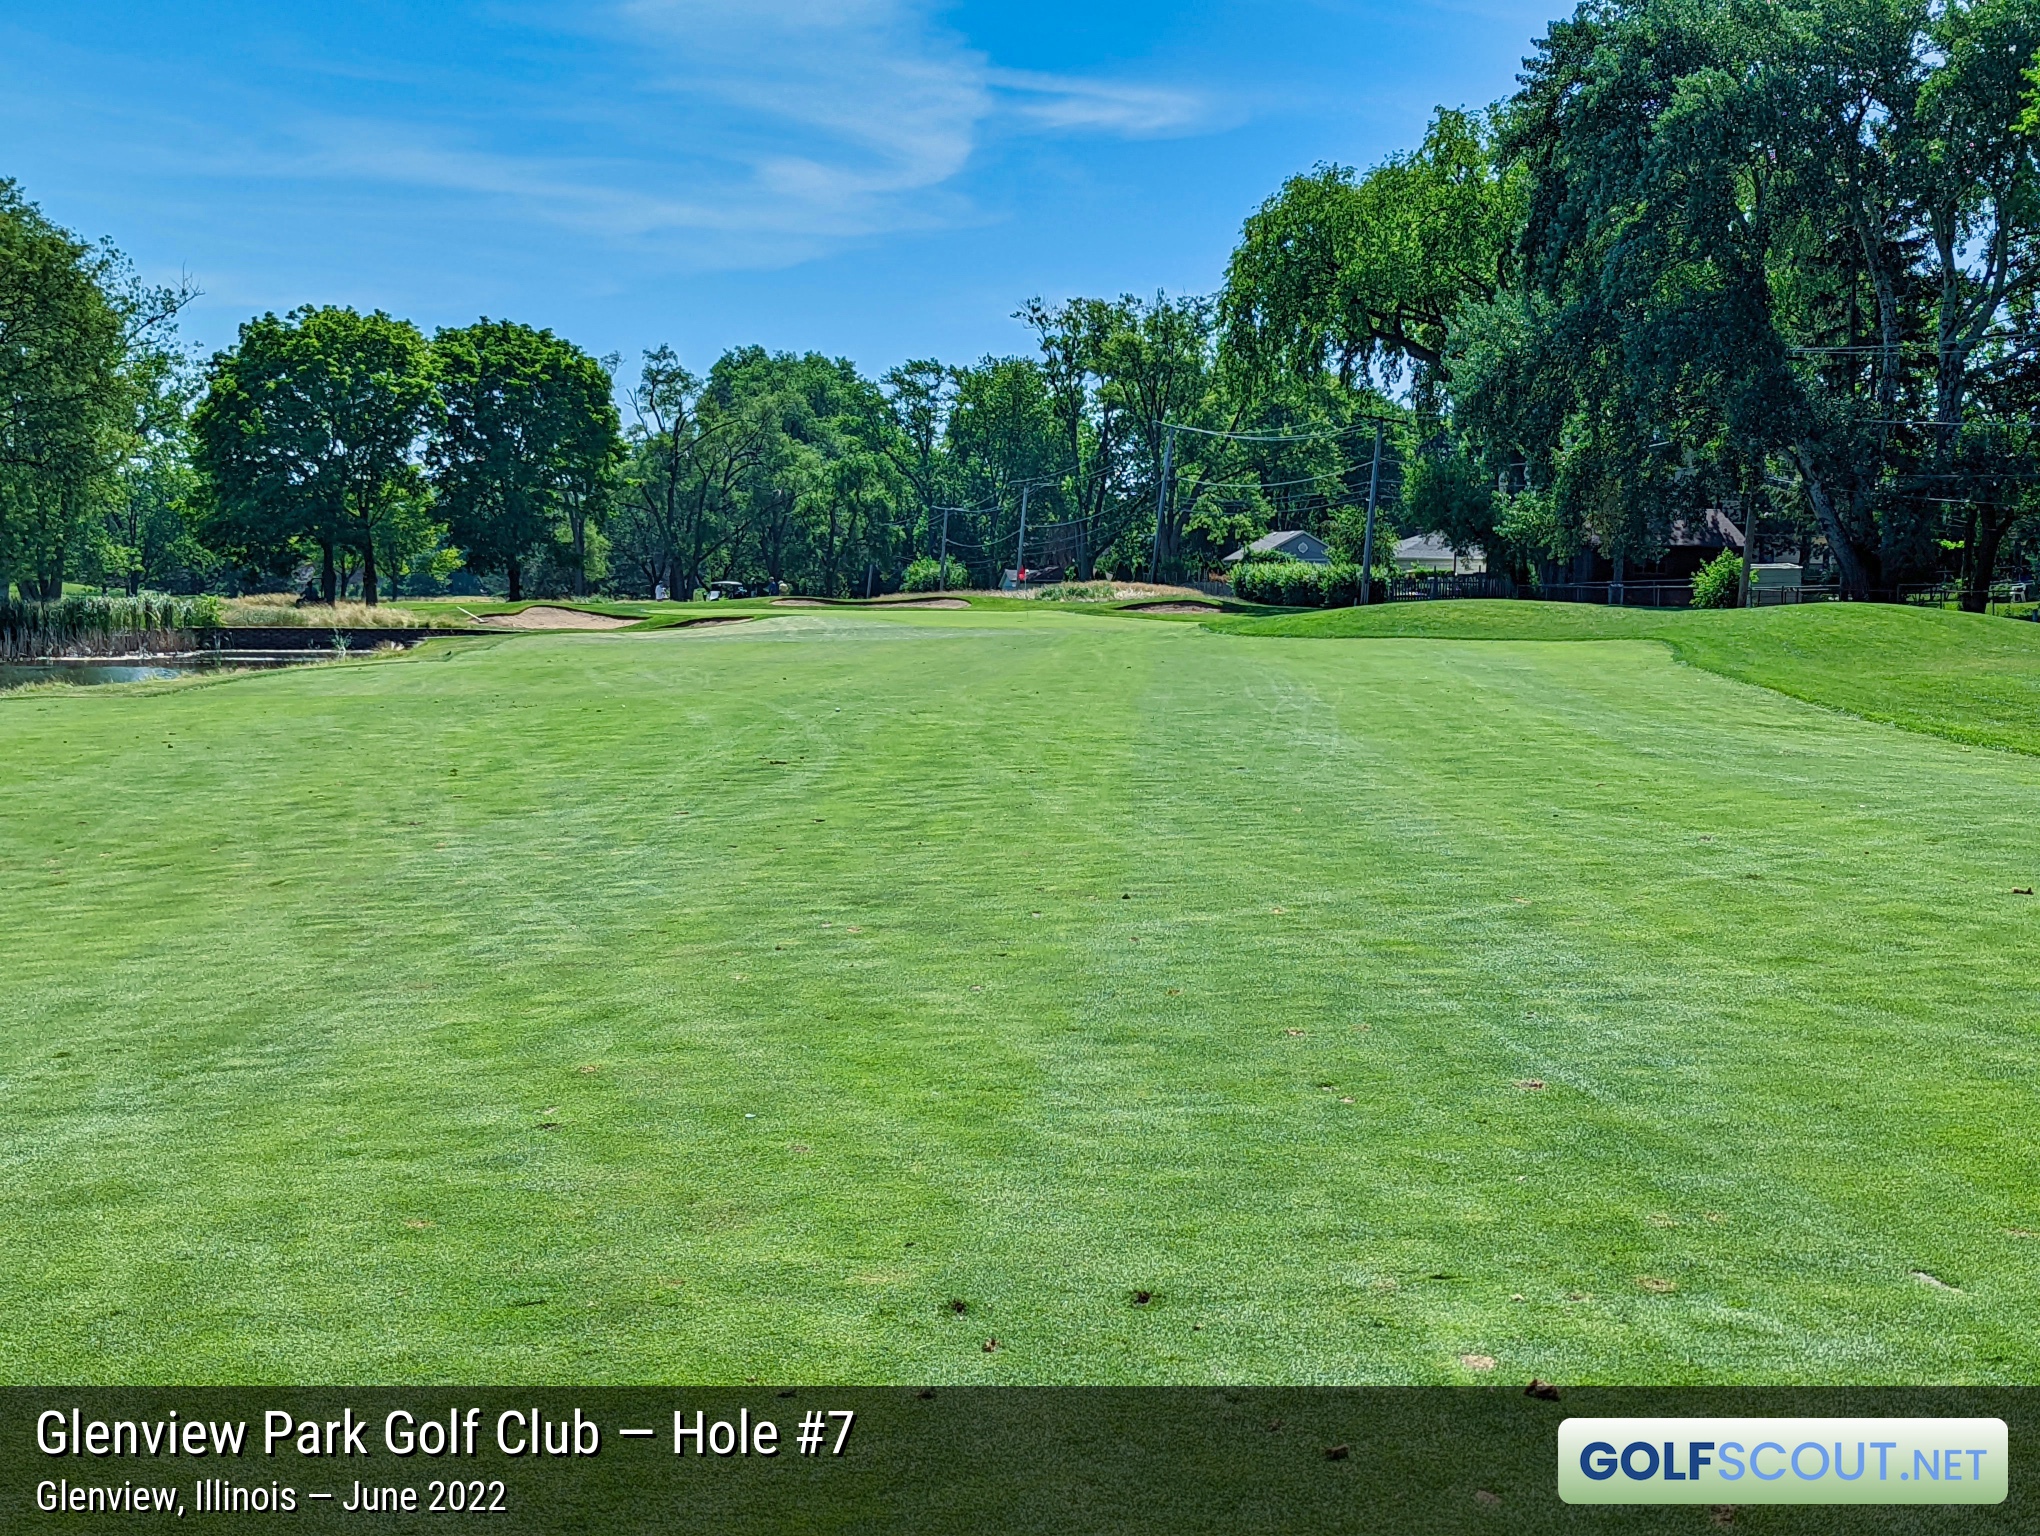 Photo of hole #7 at Glenview Park Golf Club in Glenview, Illinois. 